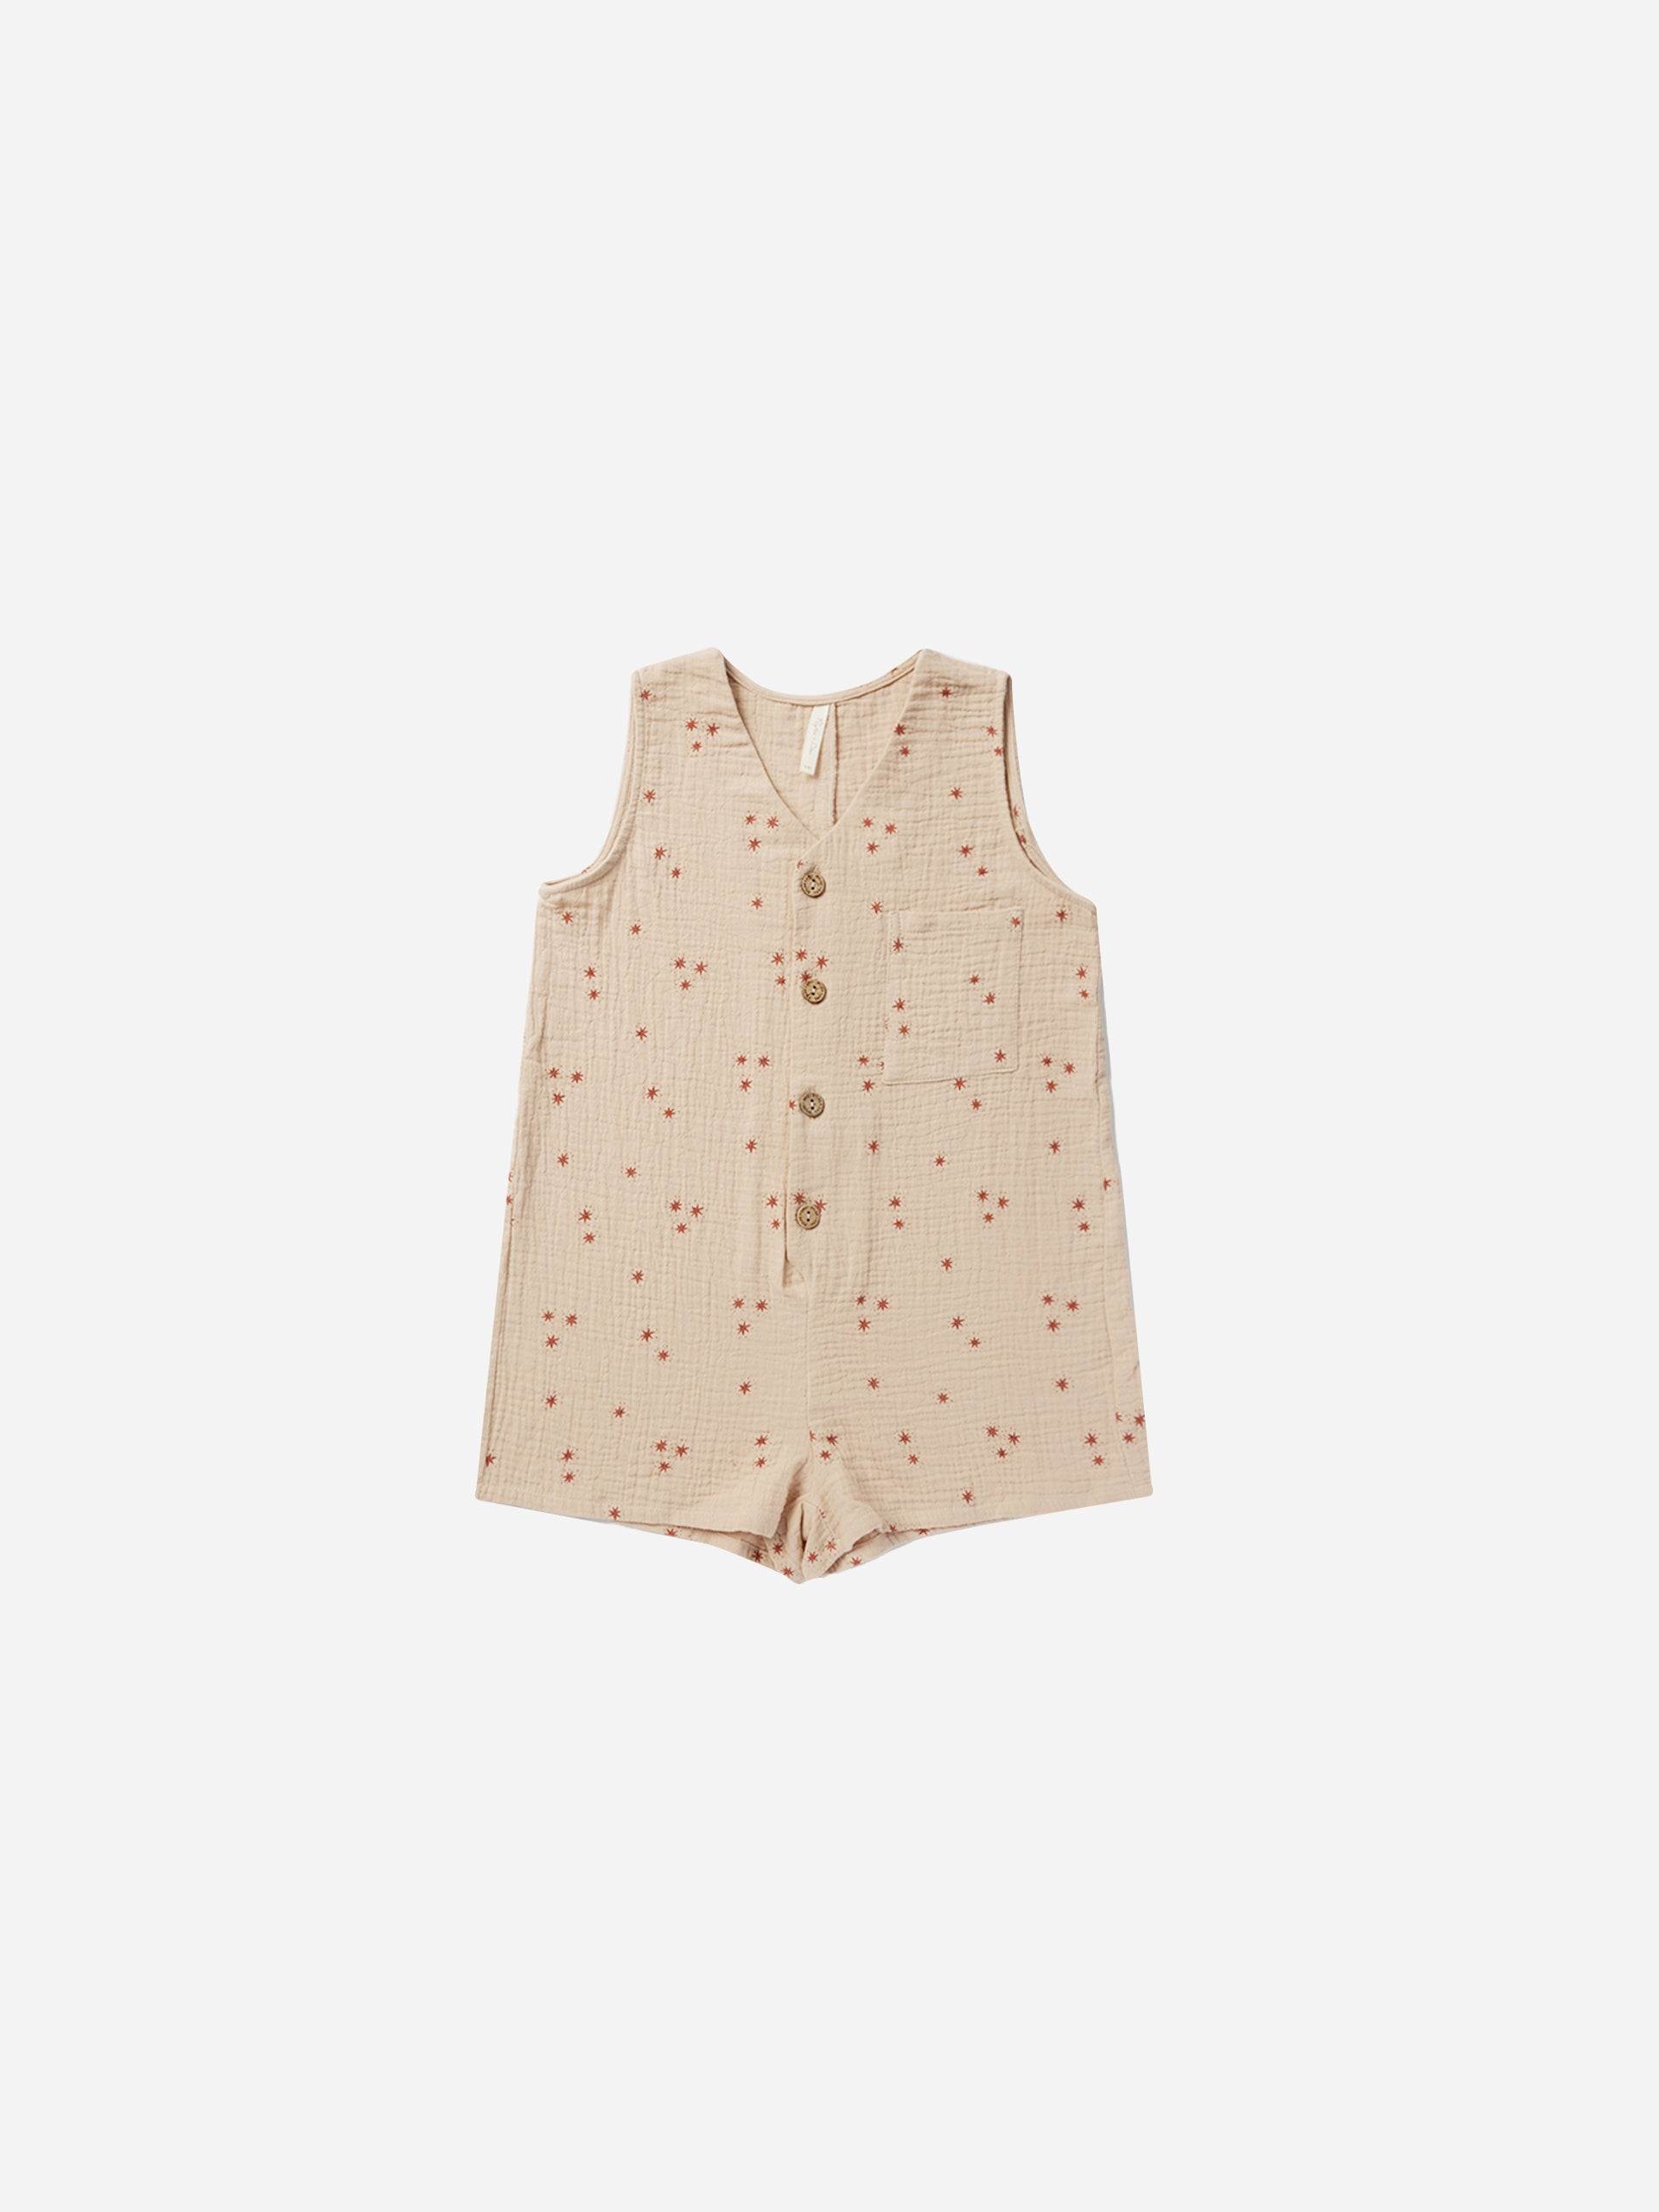 Amari Romper || Starburst - Rylee + Cru | Kids Clothes | Trendy Baby Clothes | Modern Infant Outfits |